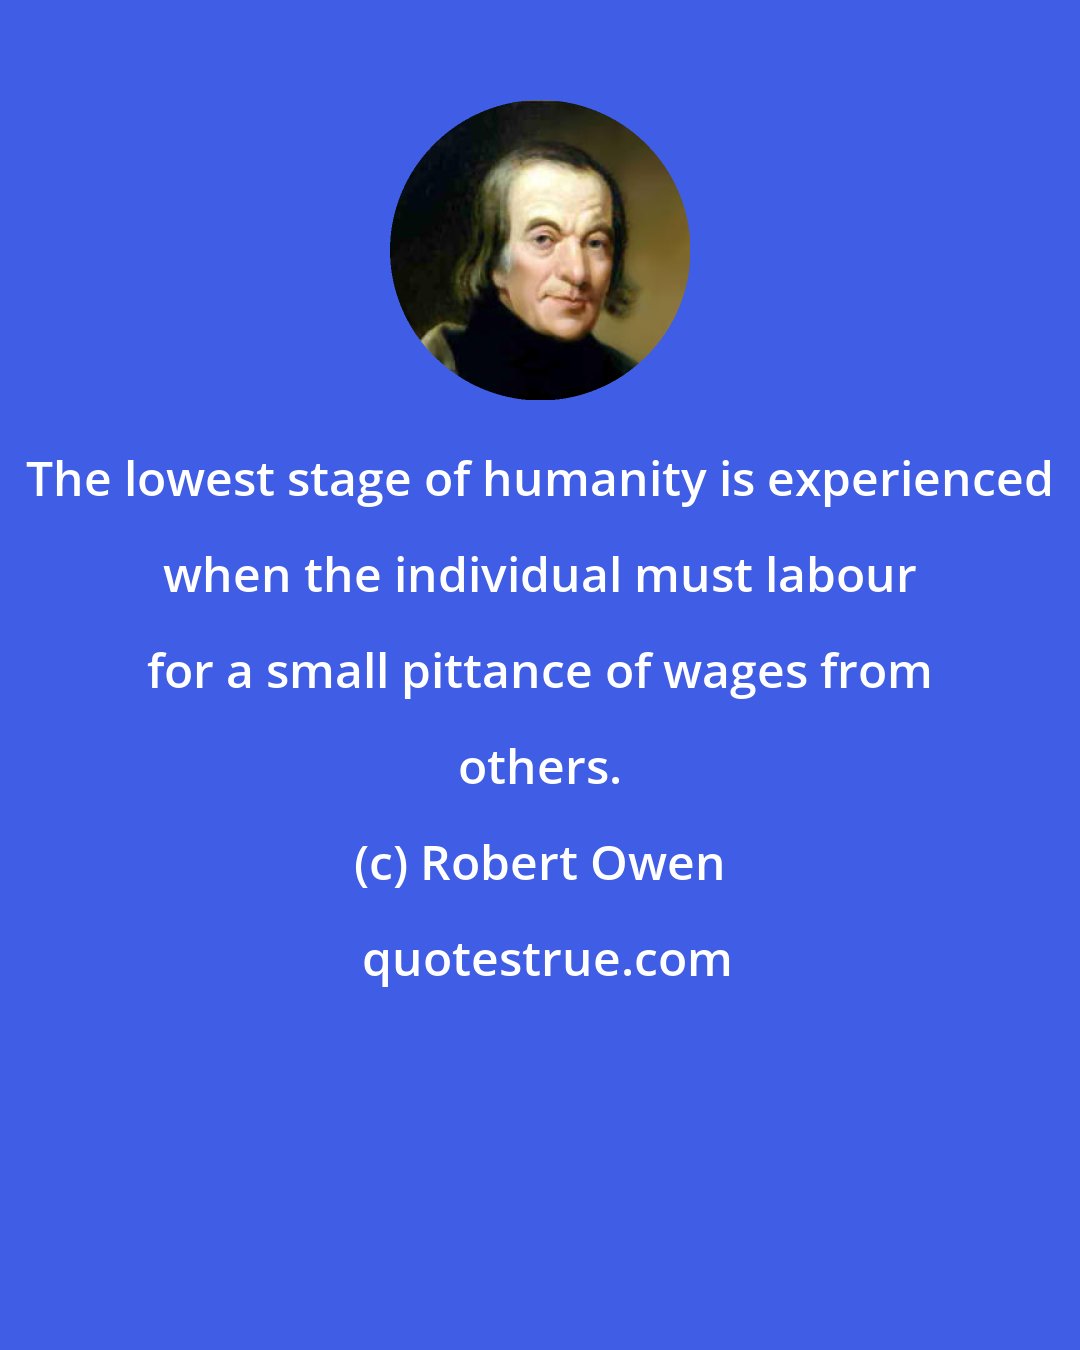 Robert Owen: The lowest stage of humanity is experienced when the individual must labour for a small pittance of wages from others.